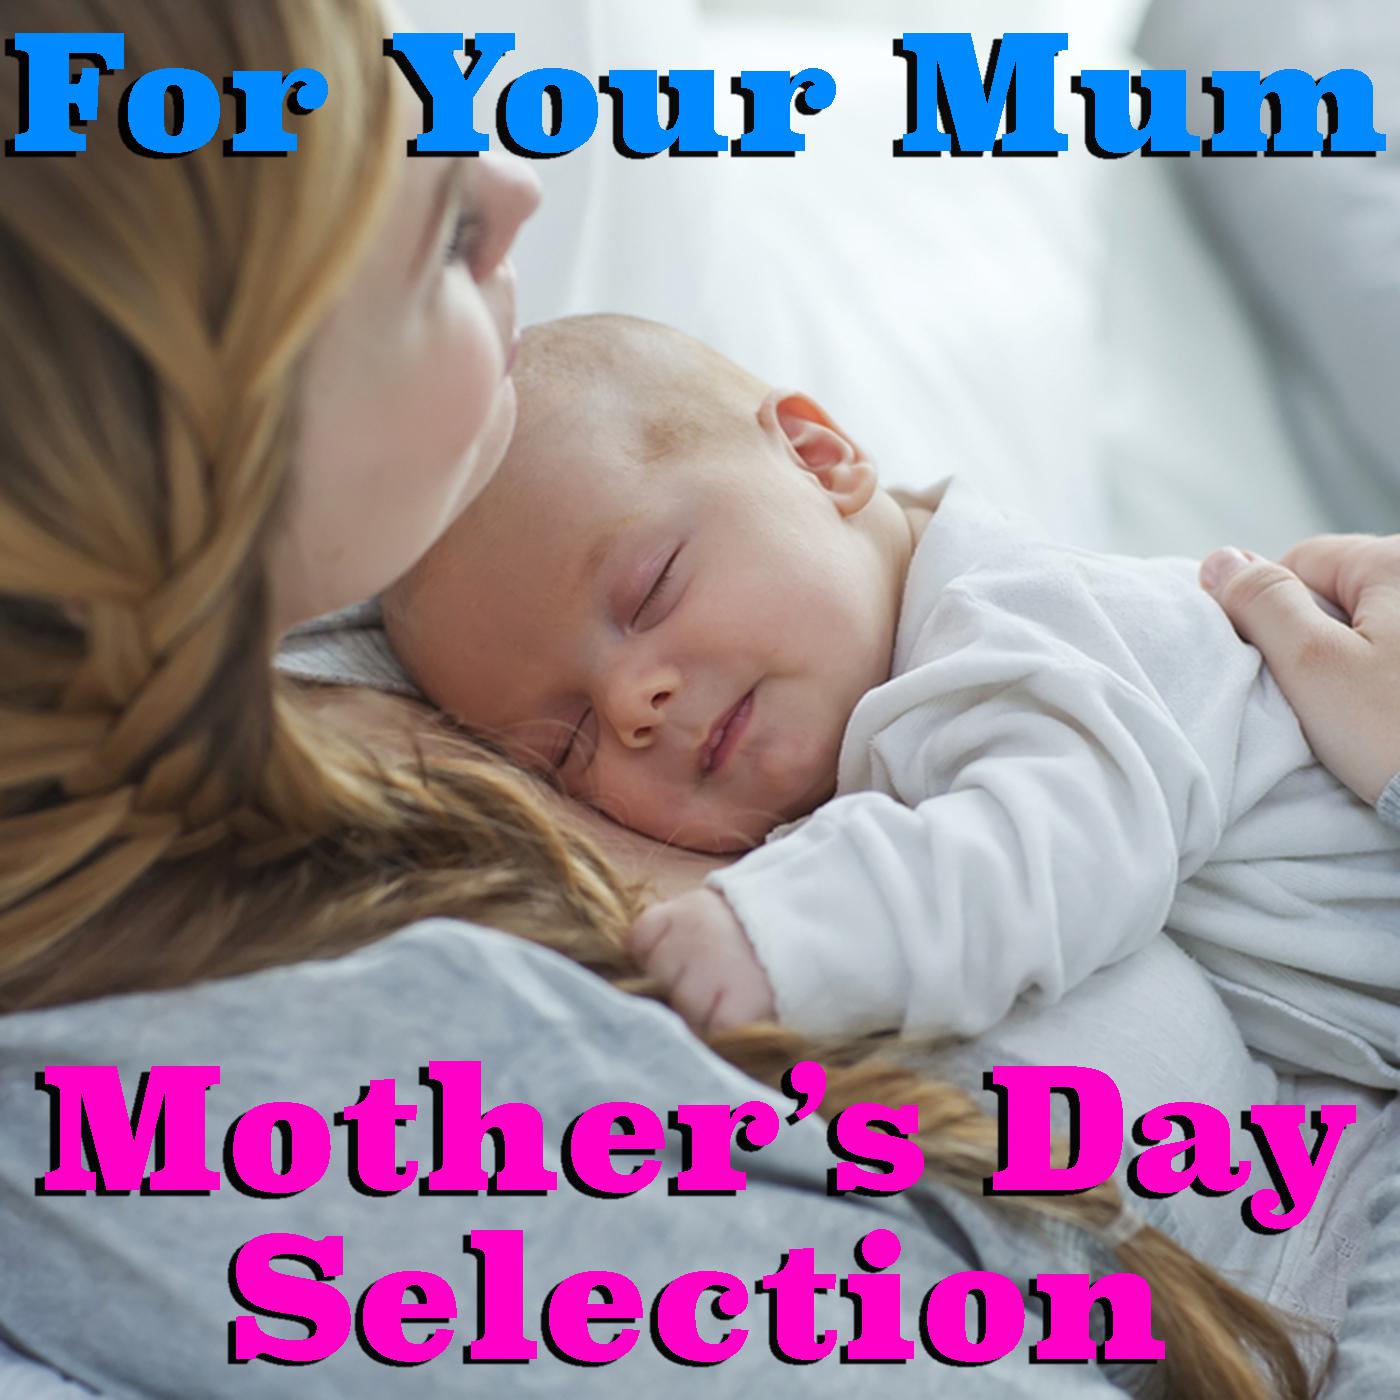 For Your Mum Mother's Day Selection